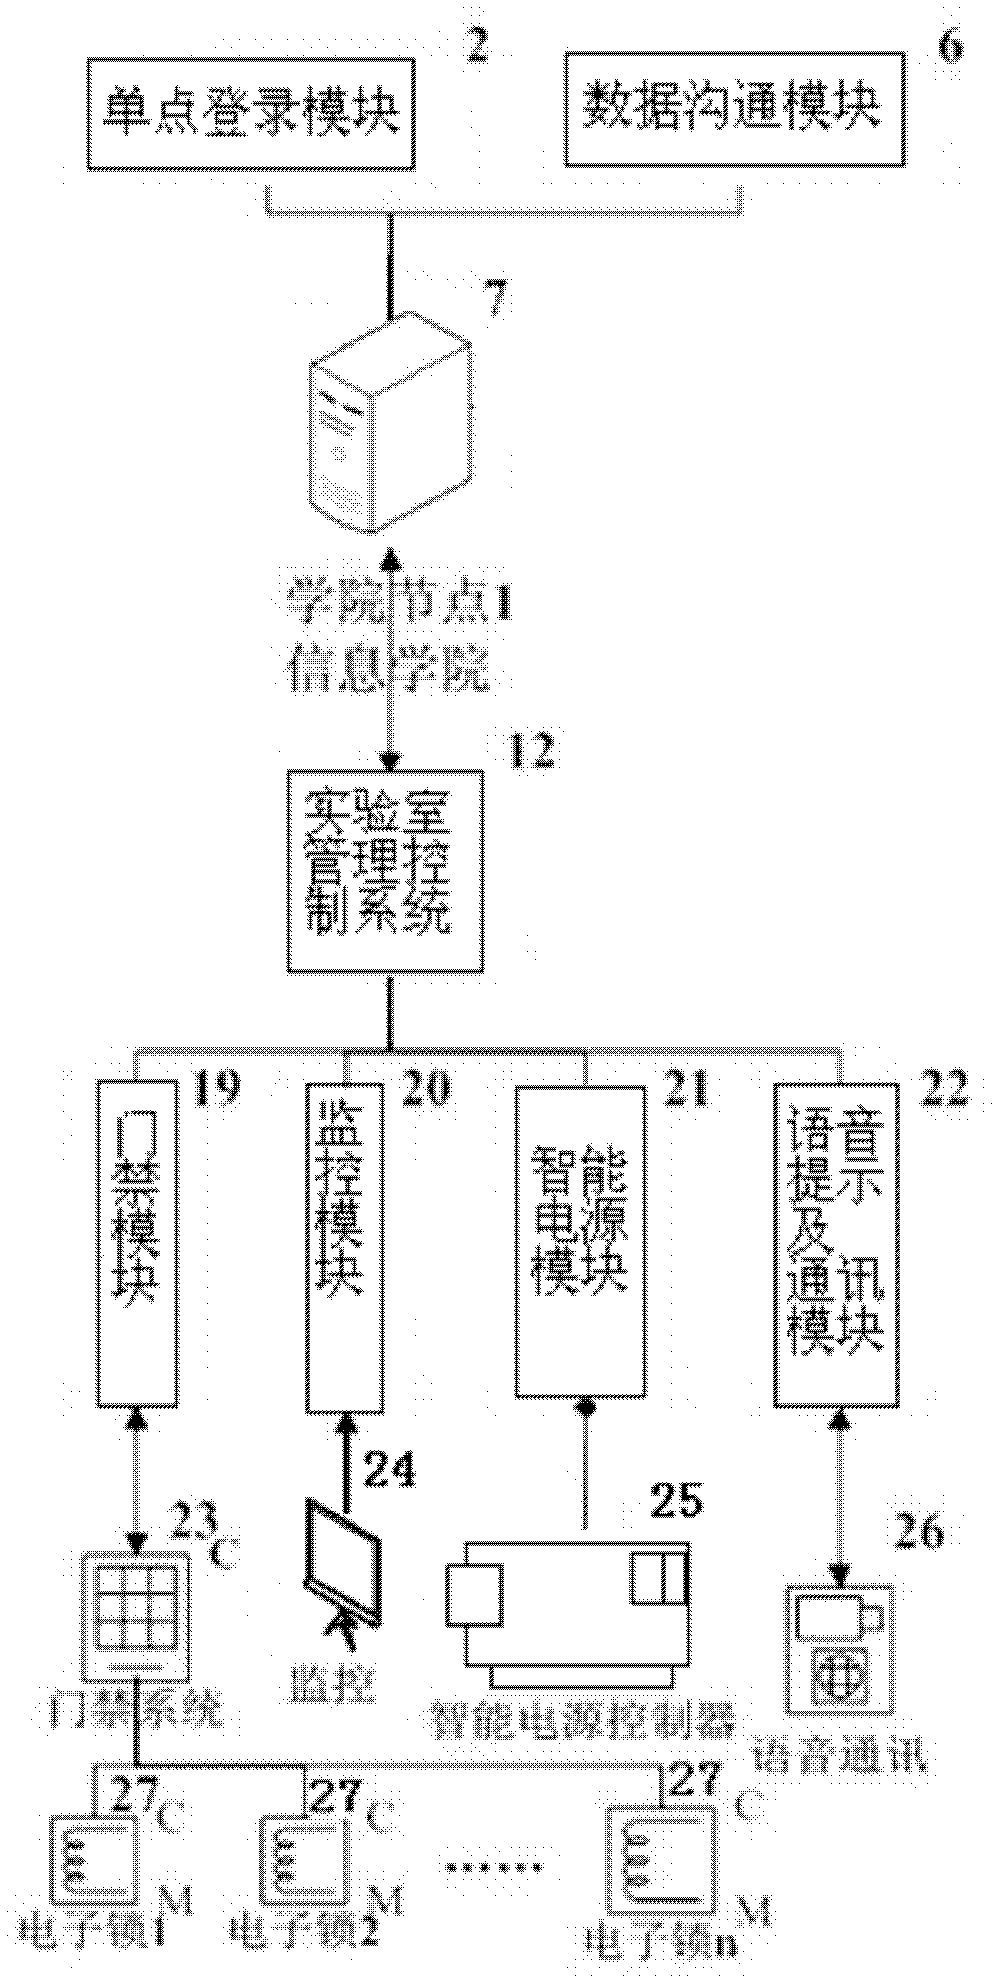 System and method for open intelligent management of laboratory